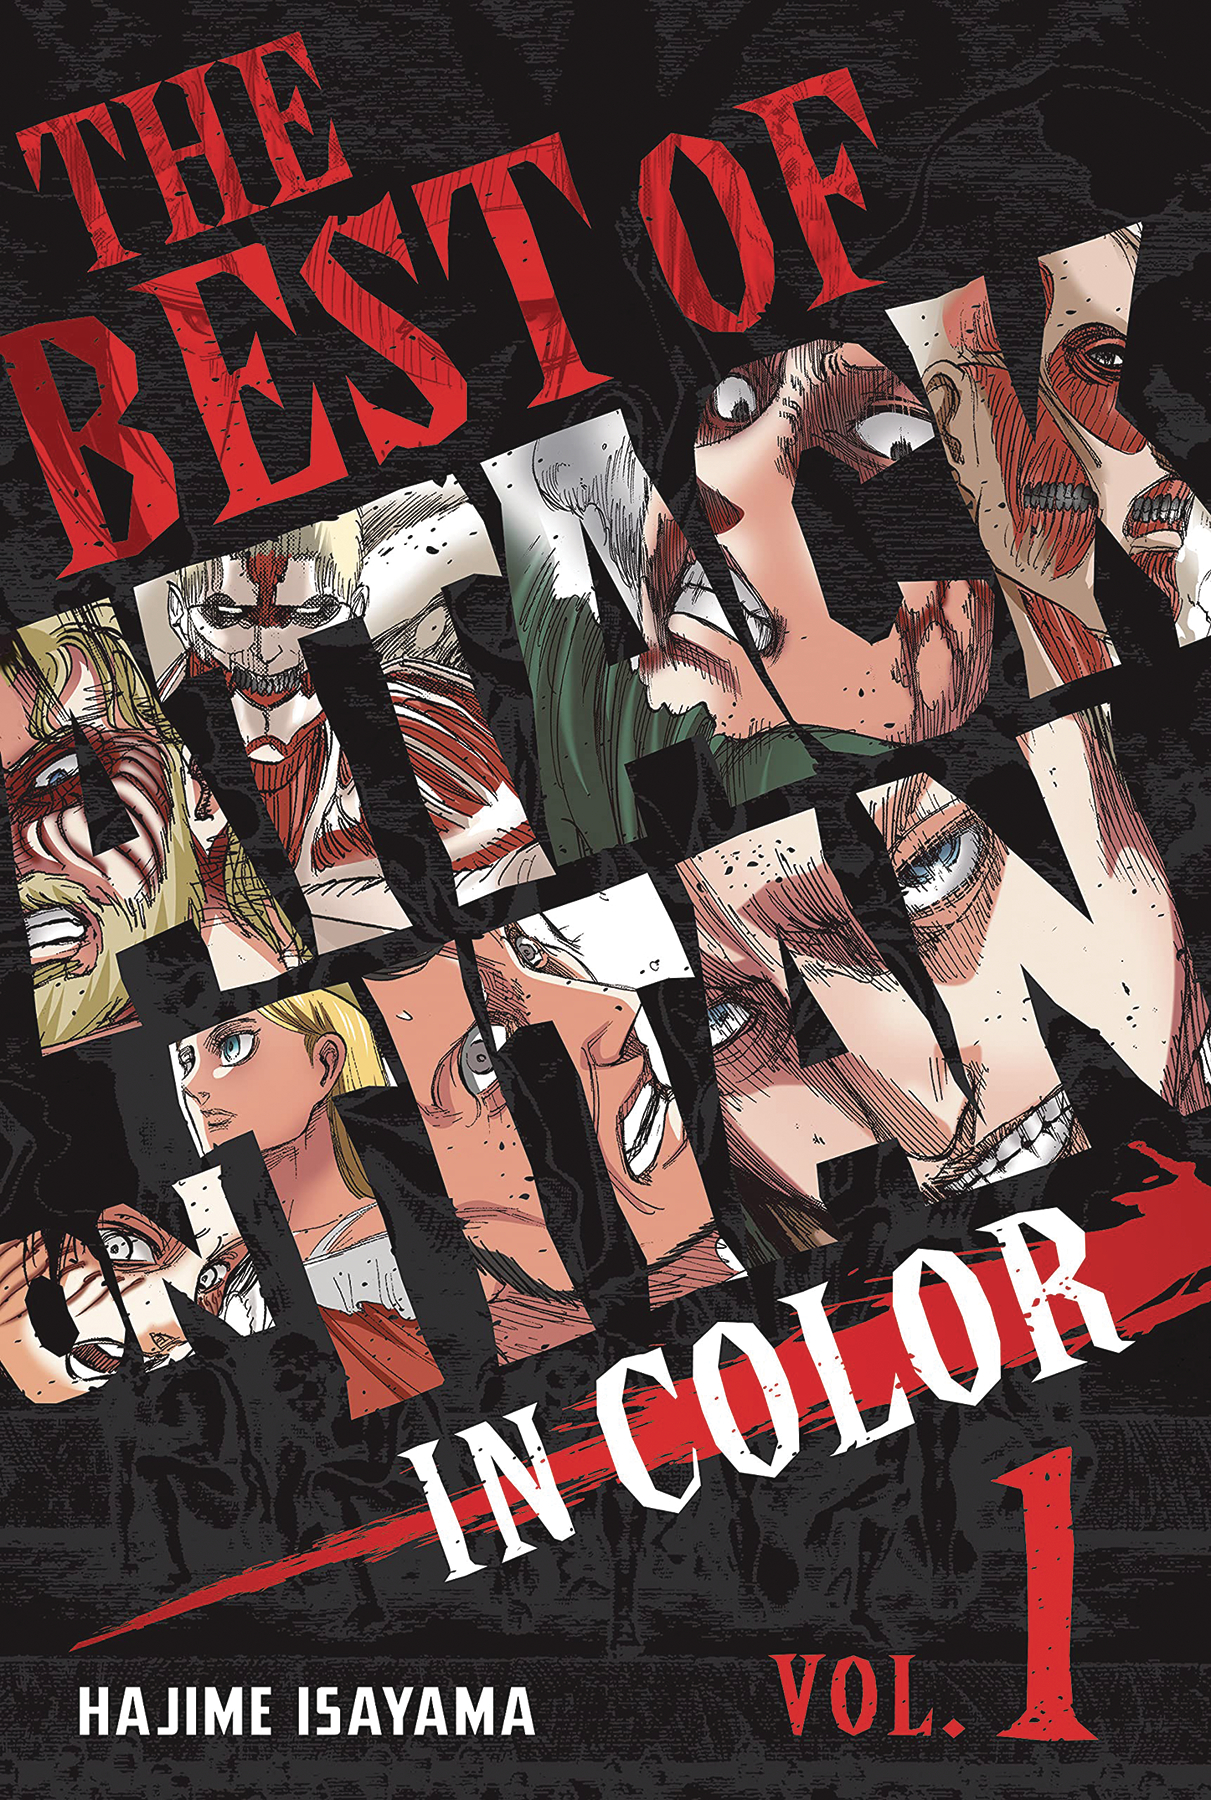 Best of Attack On Titan Color Hardcover Edition Volume 1 (Mature)